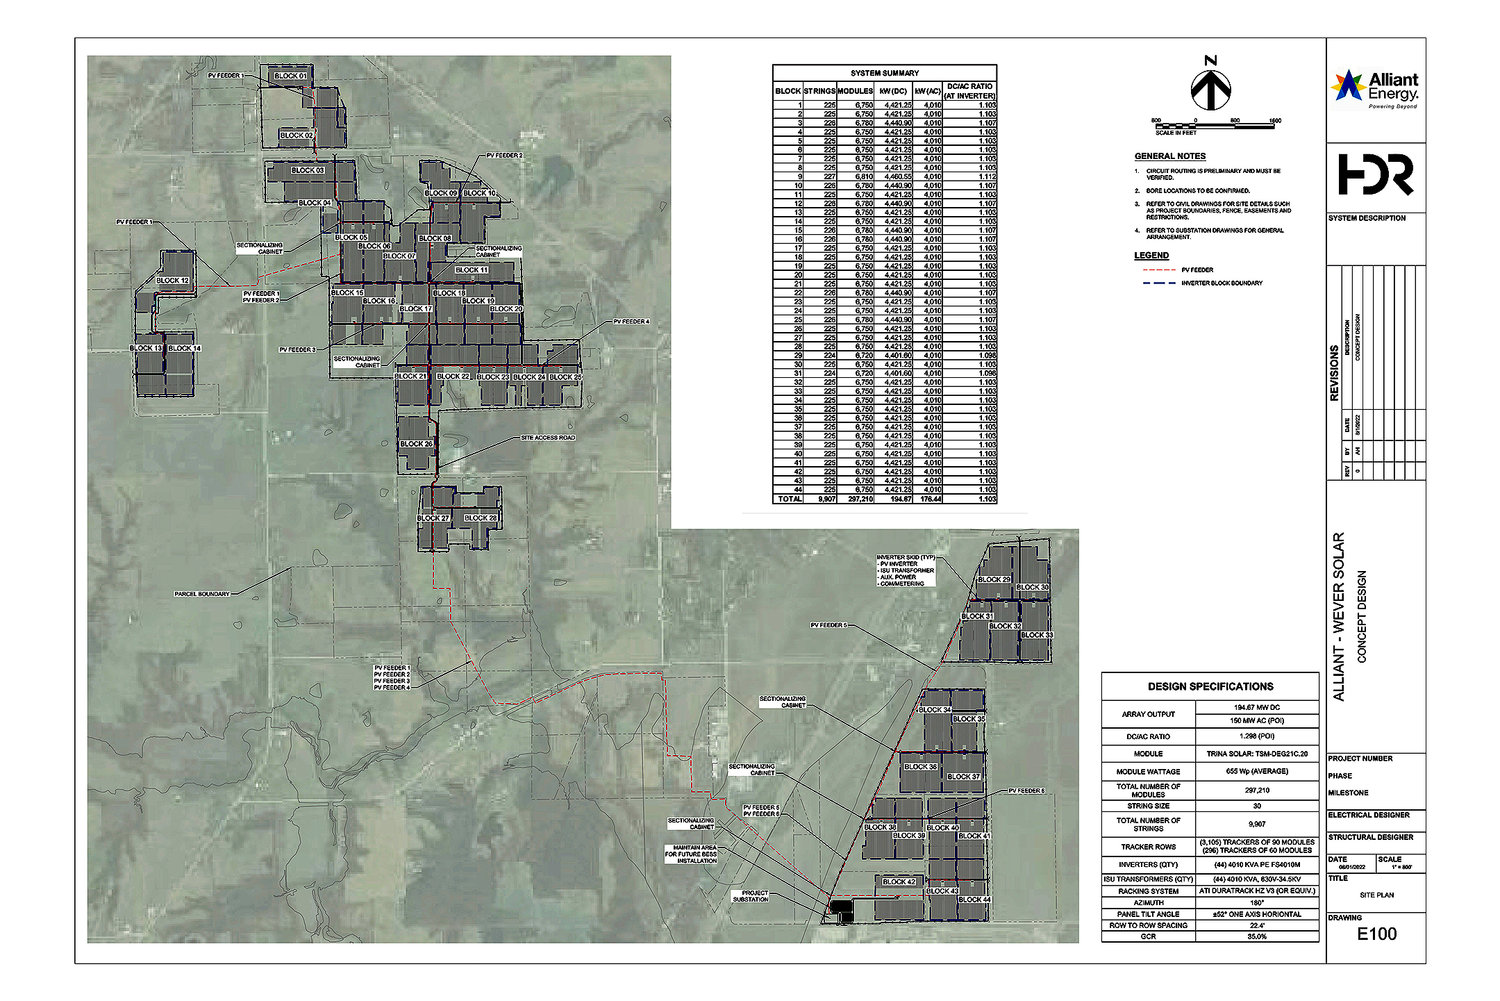 An engineering map of the proposed 150 megawatt solar field planned by Alliant Energy was released Monday at the Lee County Board of Supervisor's meeting. Supervisors approved a joint agreement with Alliant outlining responsibilities of the project